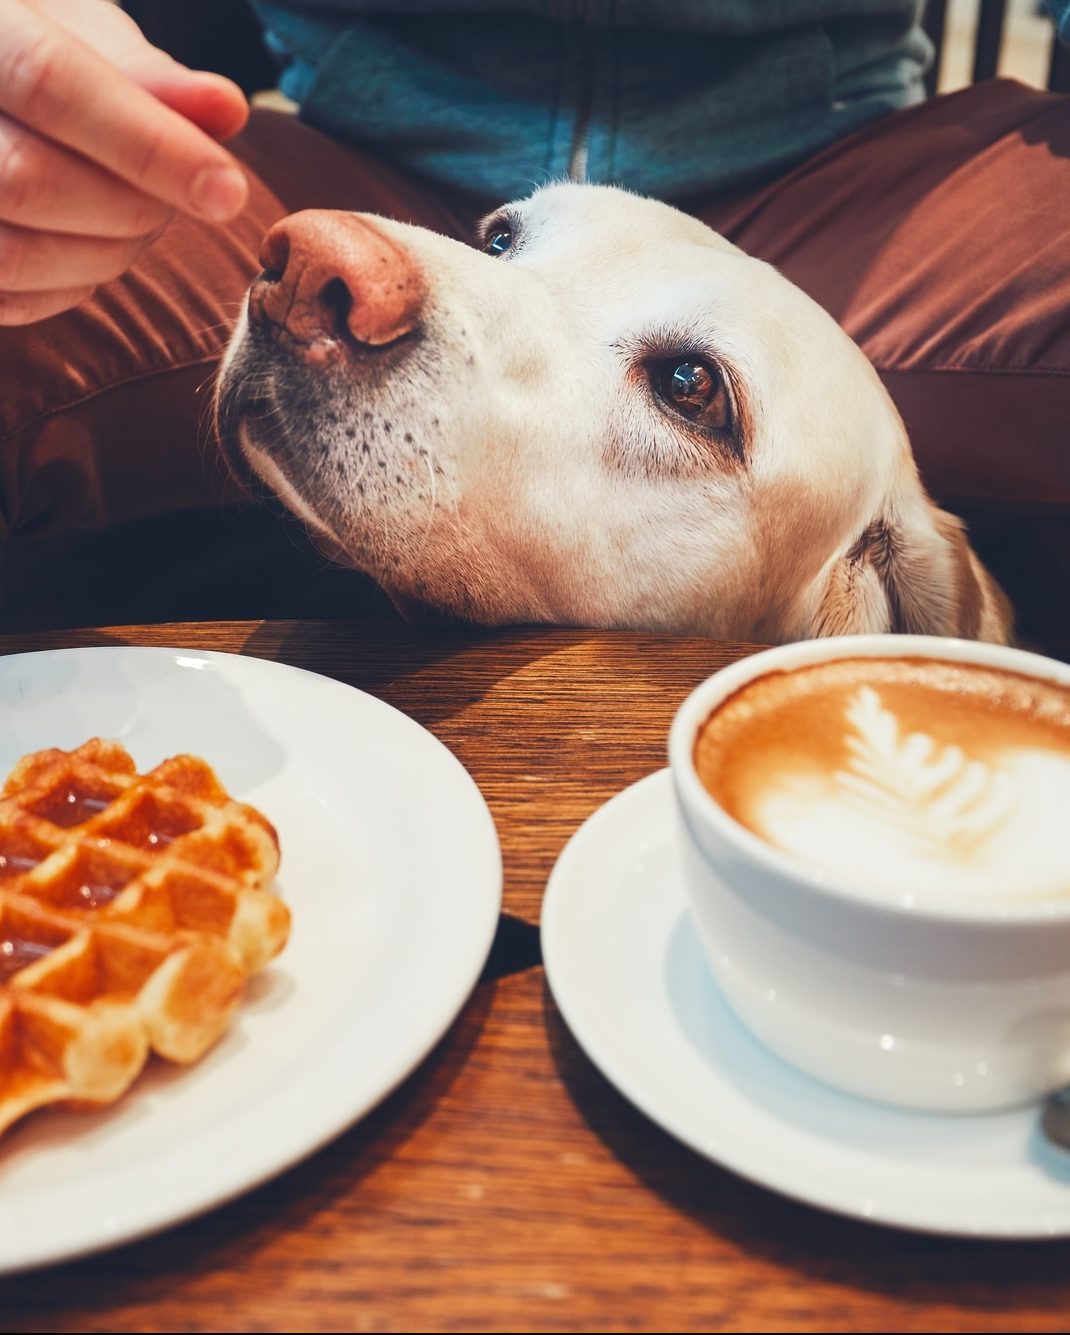 A dog at a cafe sniffing food.